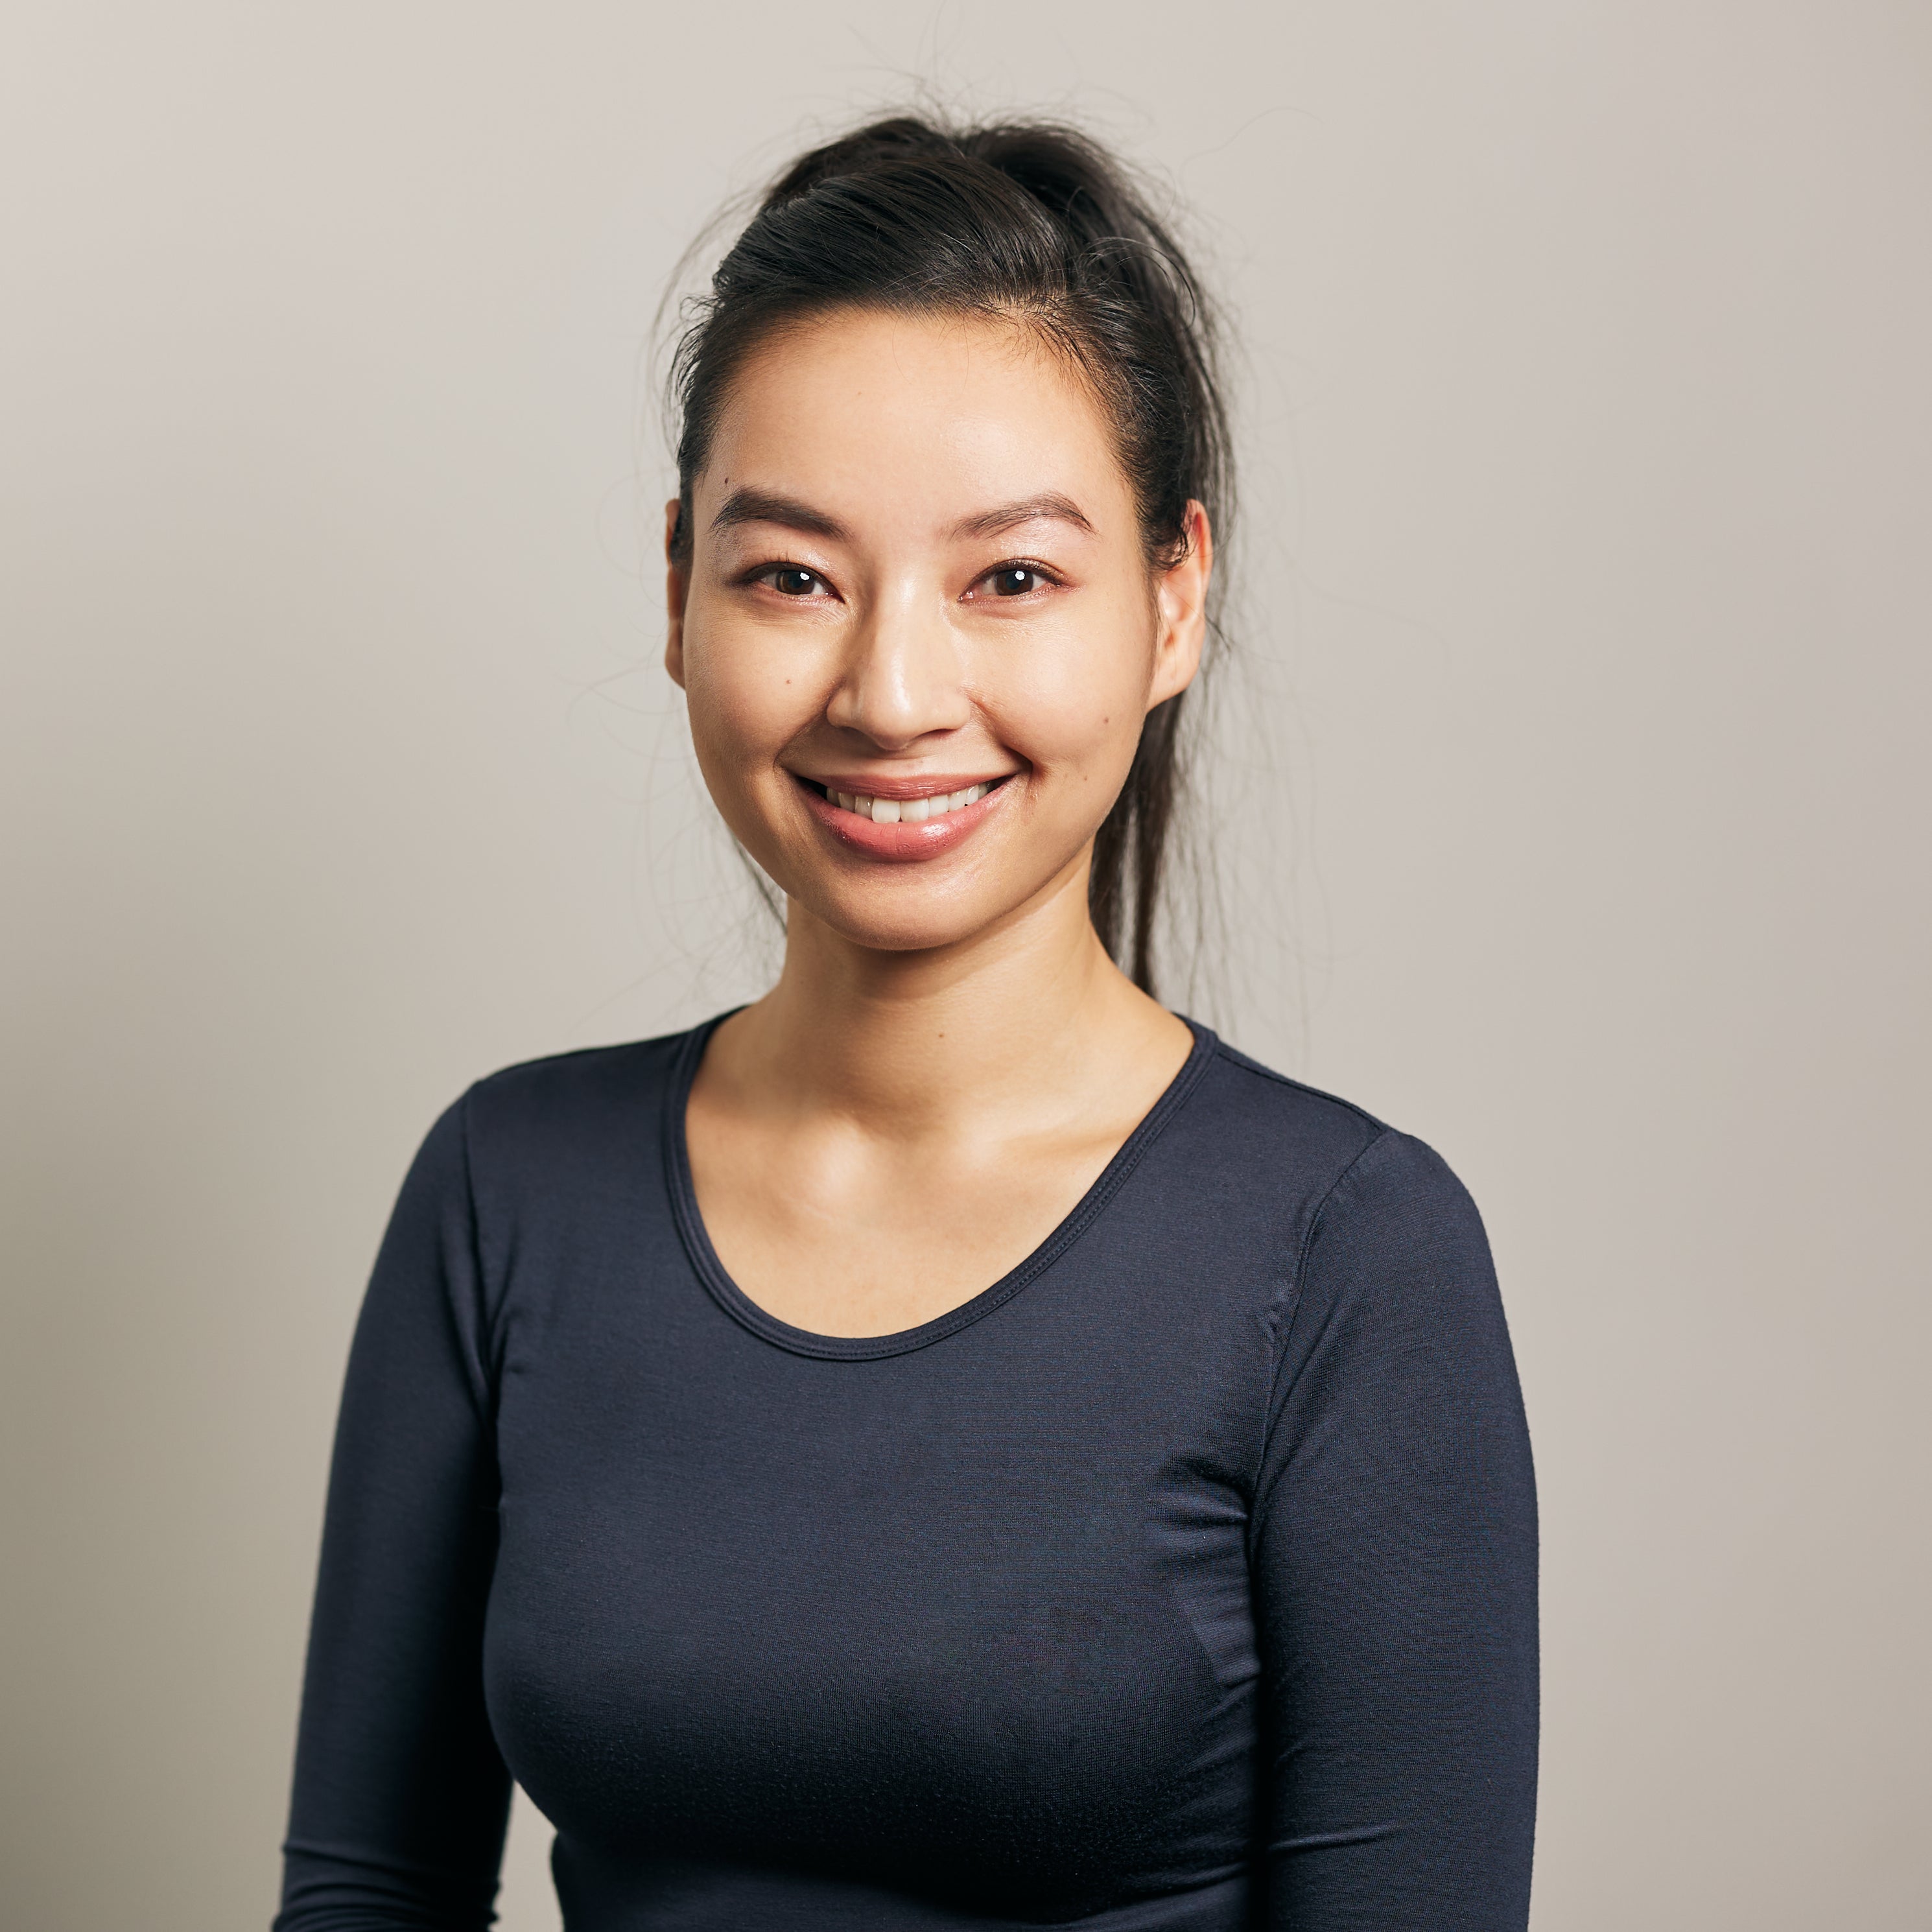 Dr Vy is a leading Aesthetic Doctor practising at Medicetics, a central London aesthetic clinic. 